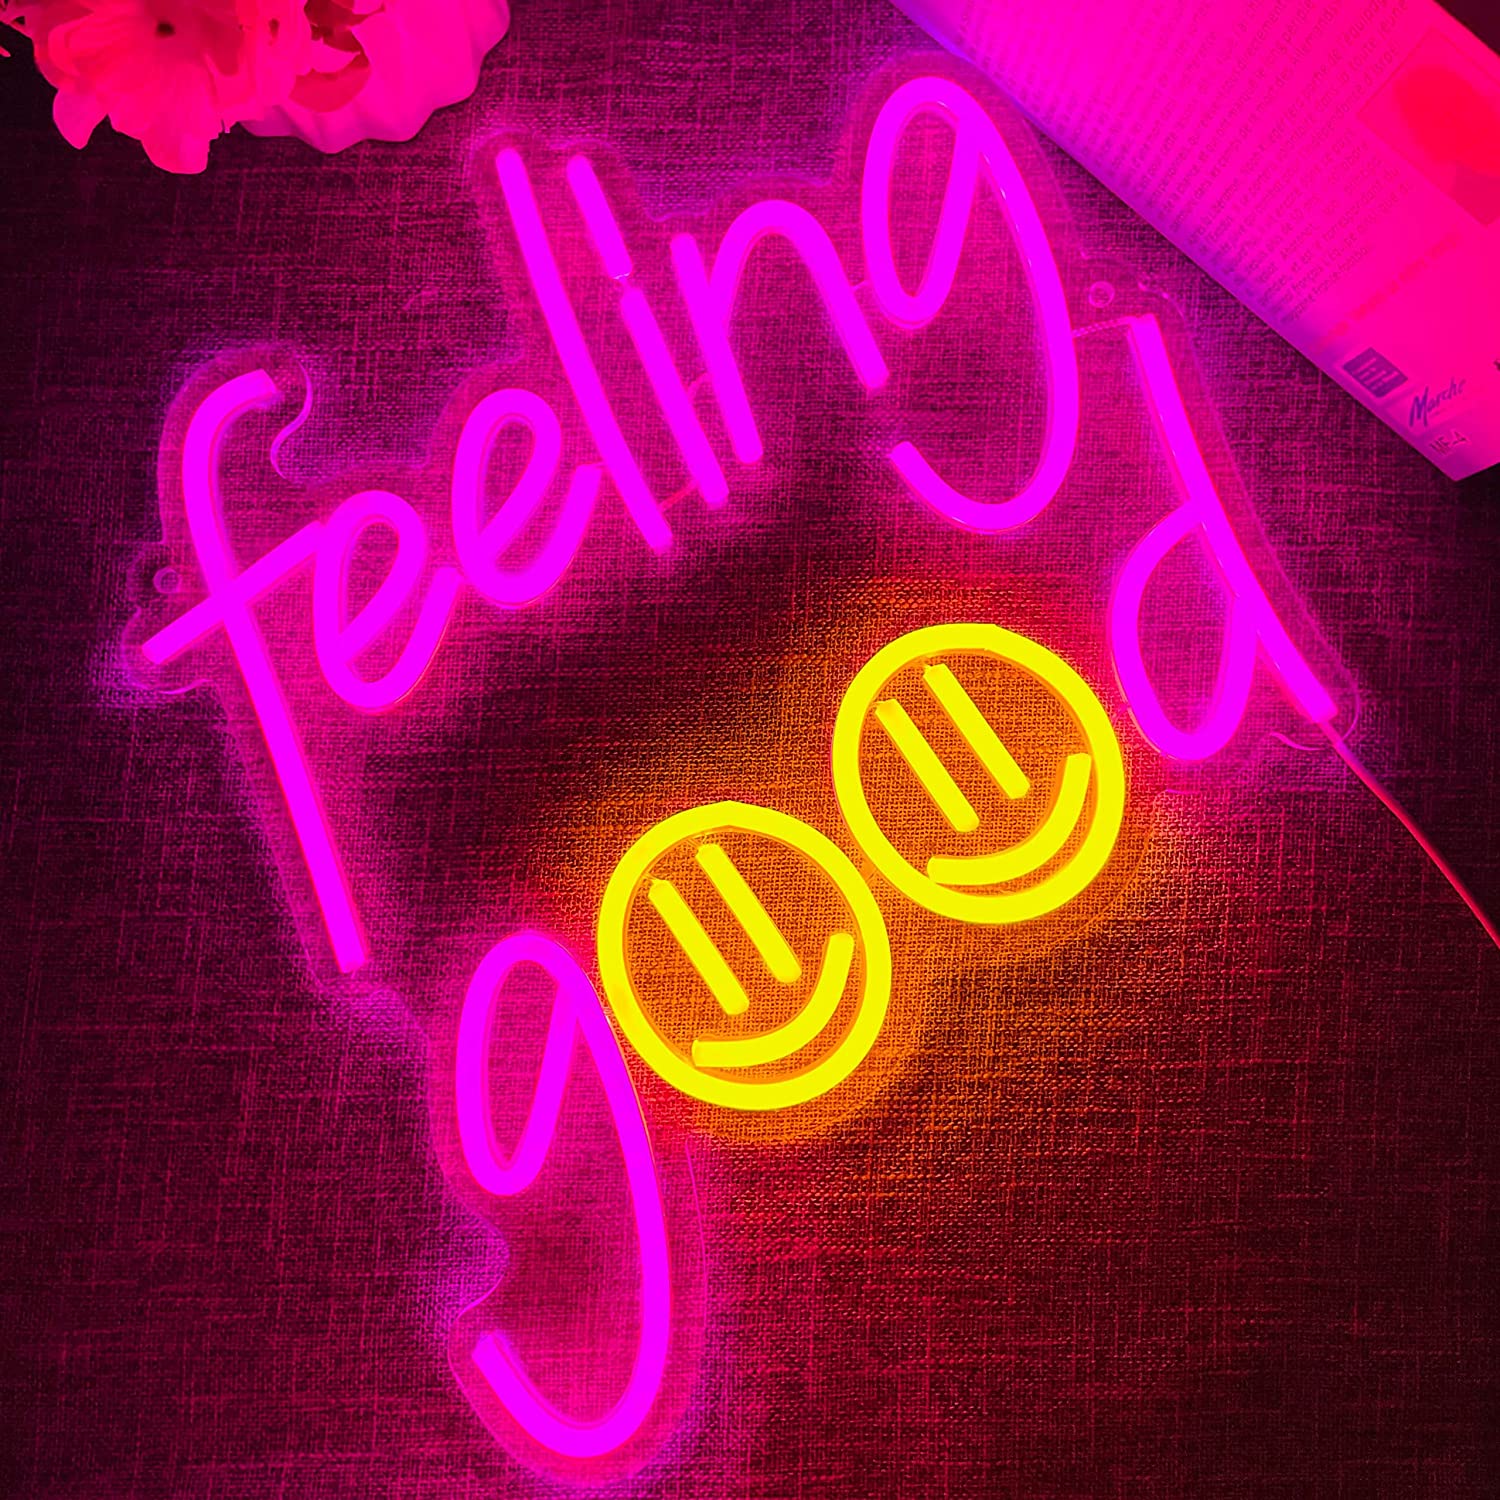 NEONIP-100% Handmade Feeling Good with Smiley Face LED Neon Sign